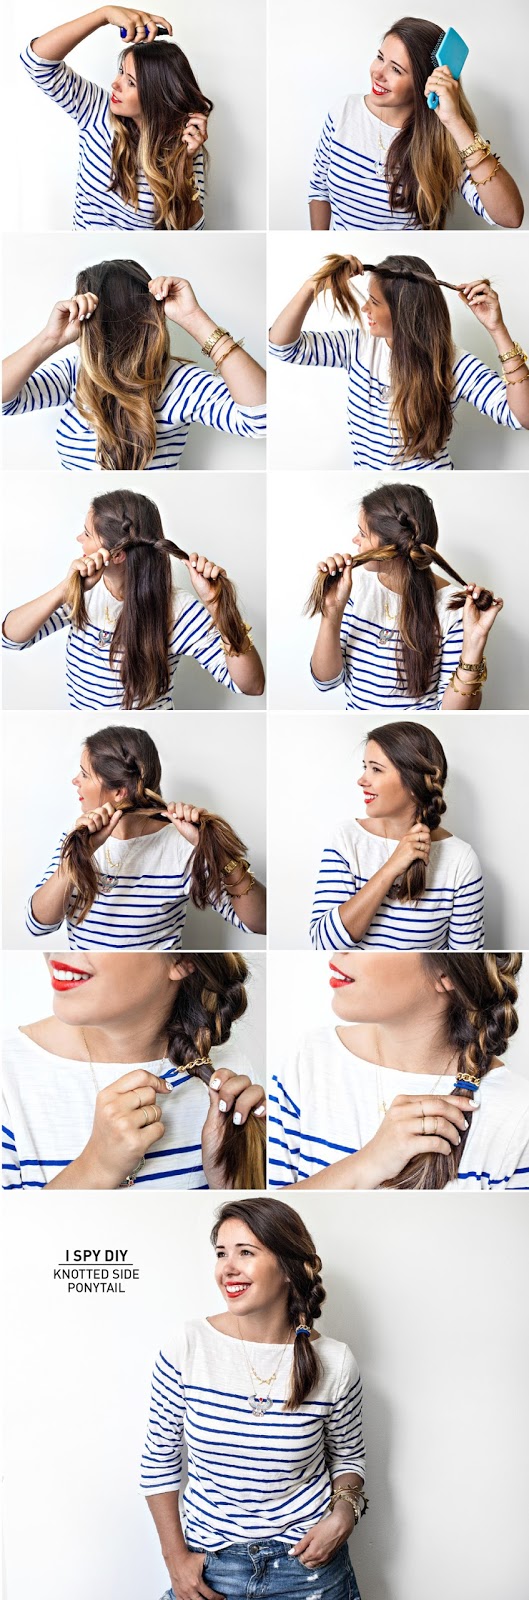 DIY Knotted Side Ponytail